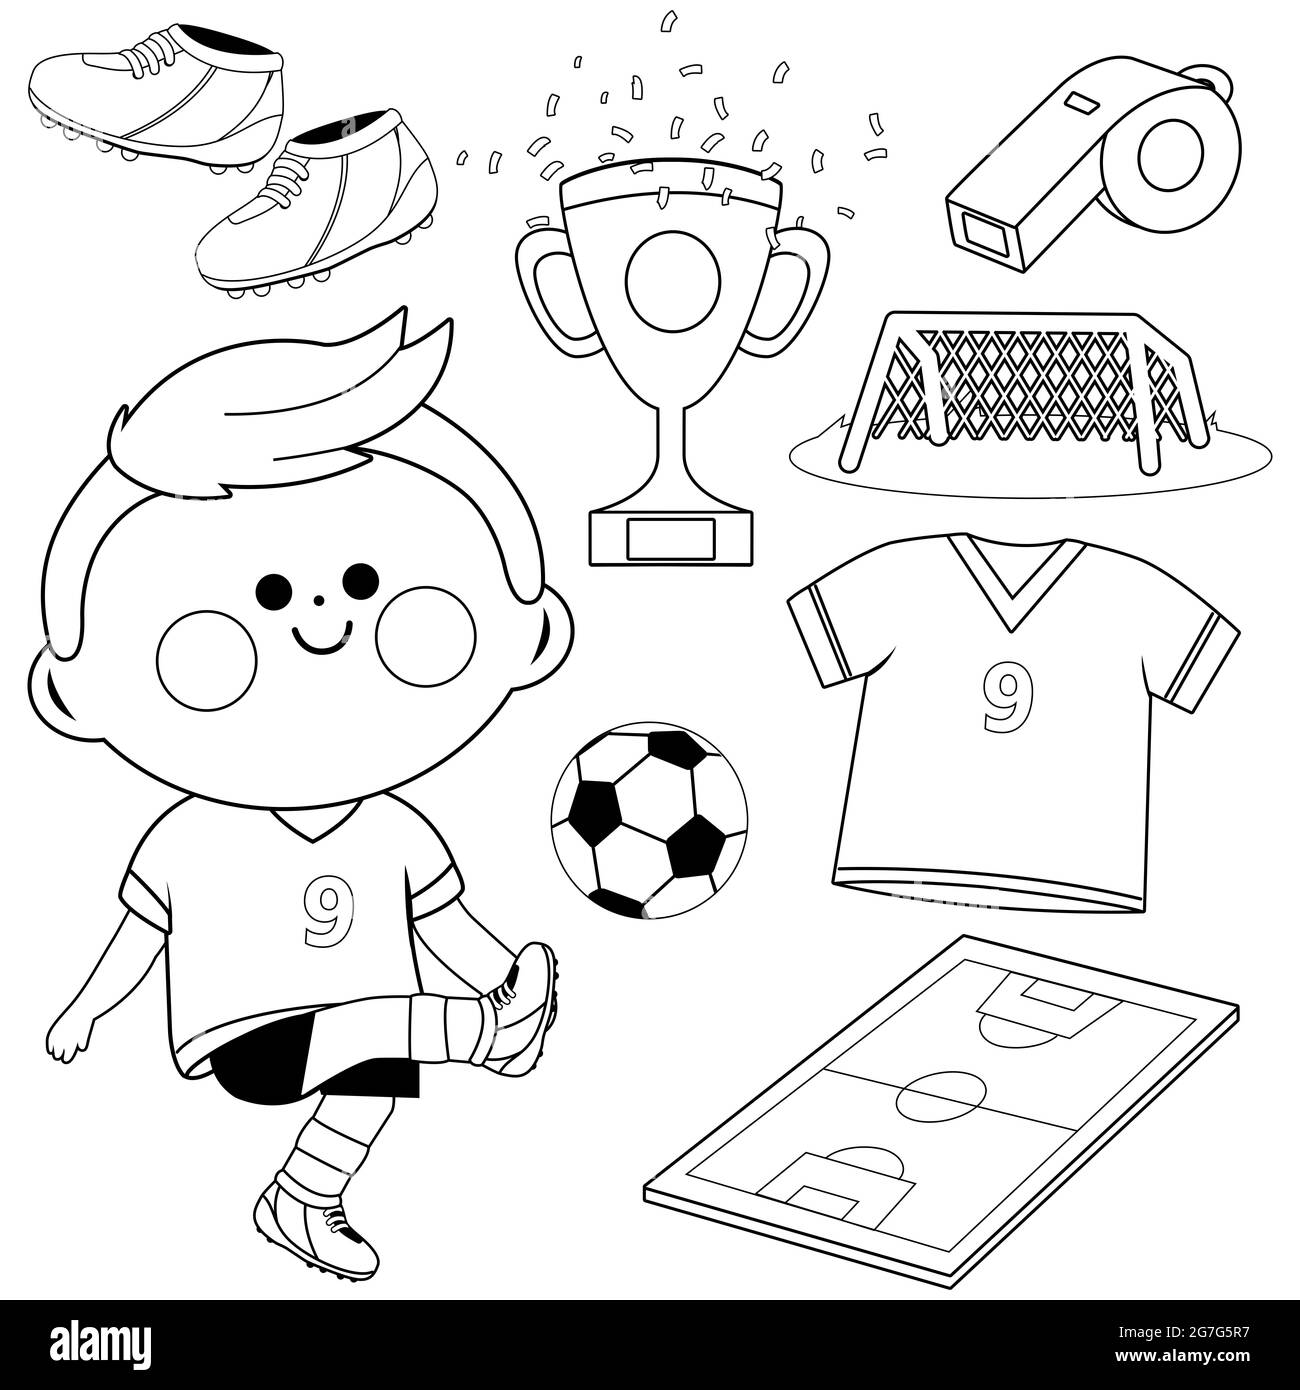 Little boy playing soccer. Black and white coloring page Stock Photo